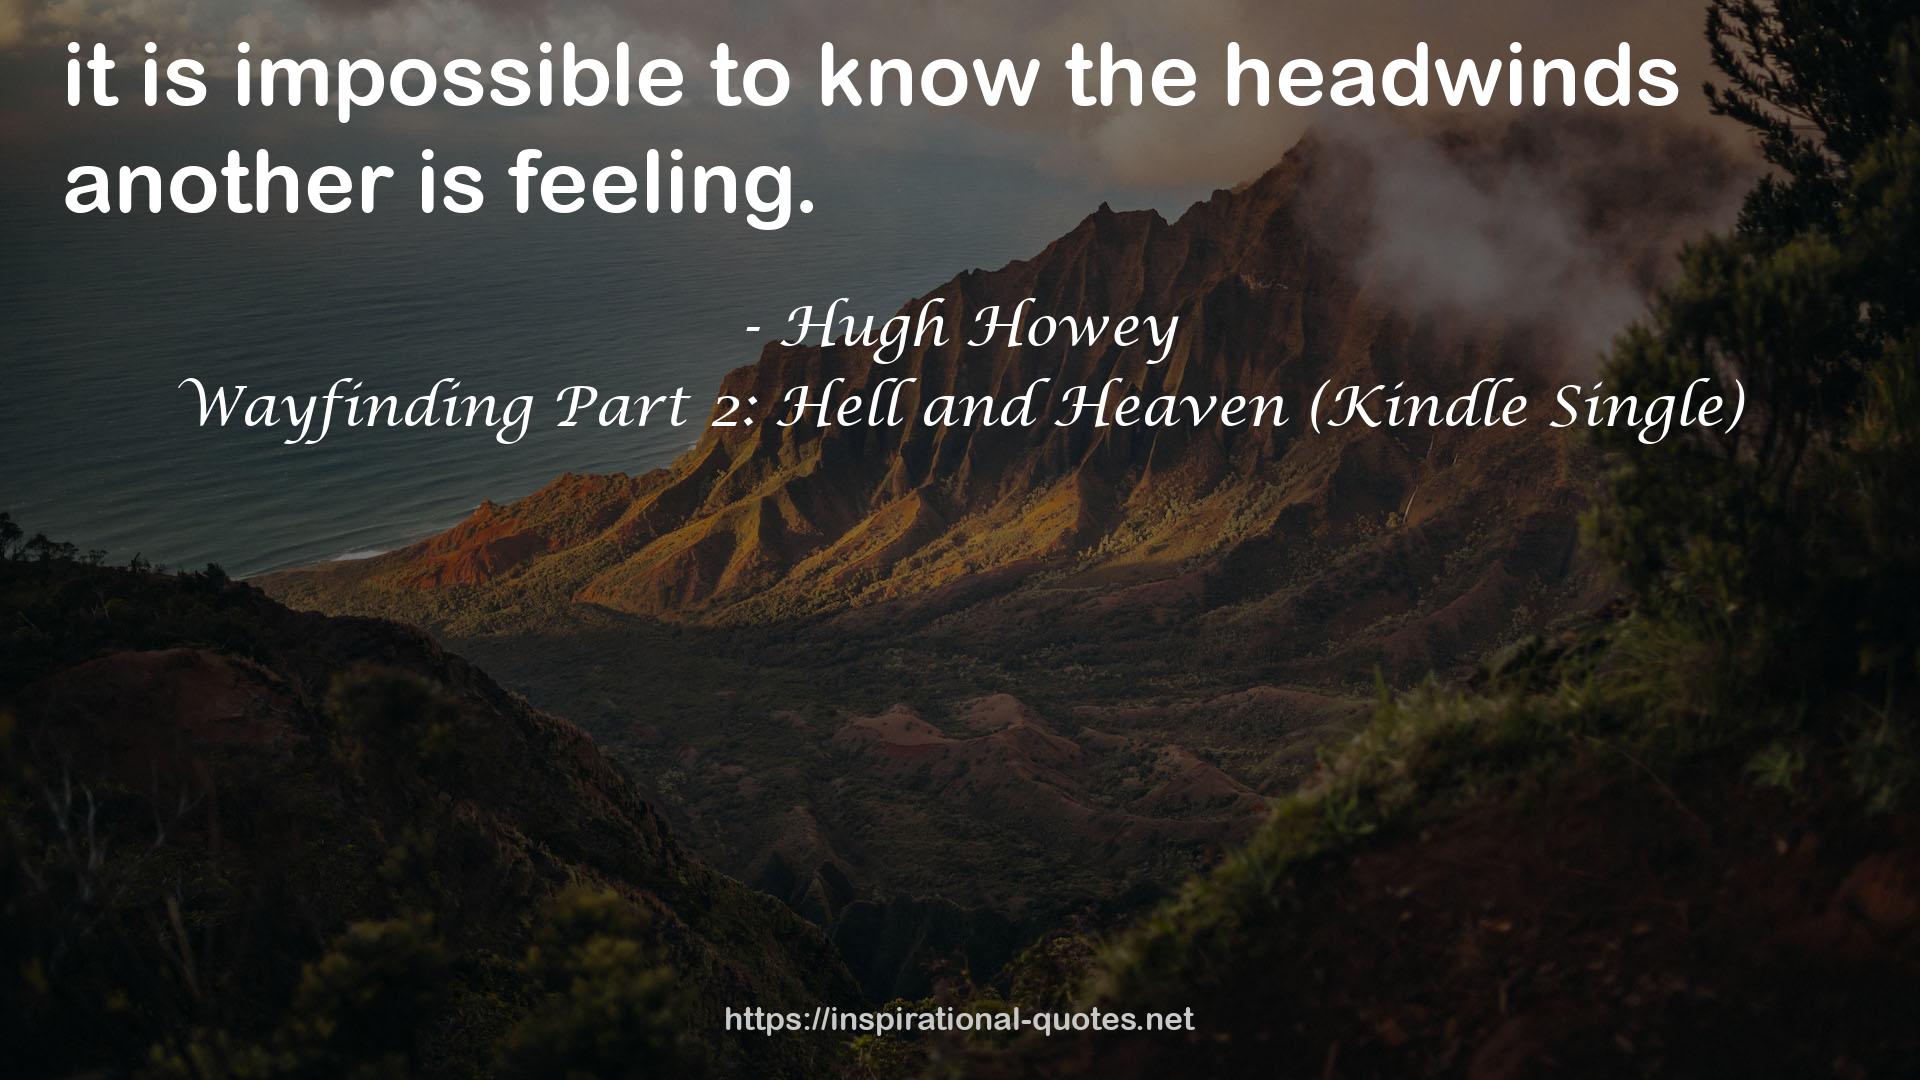 Wayfinding Part 2: Hell and Heaven (Kindle Single) QUOTES